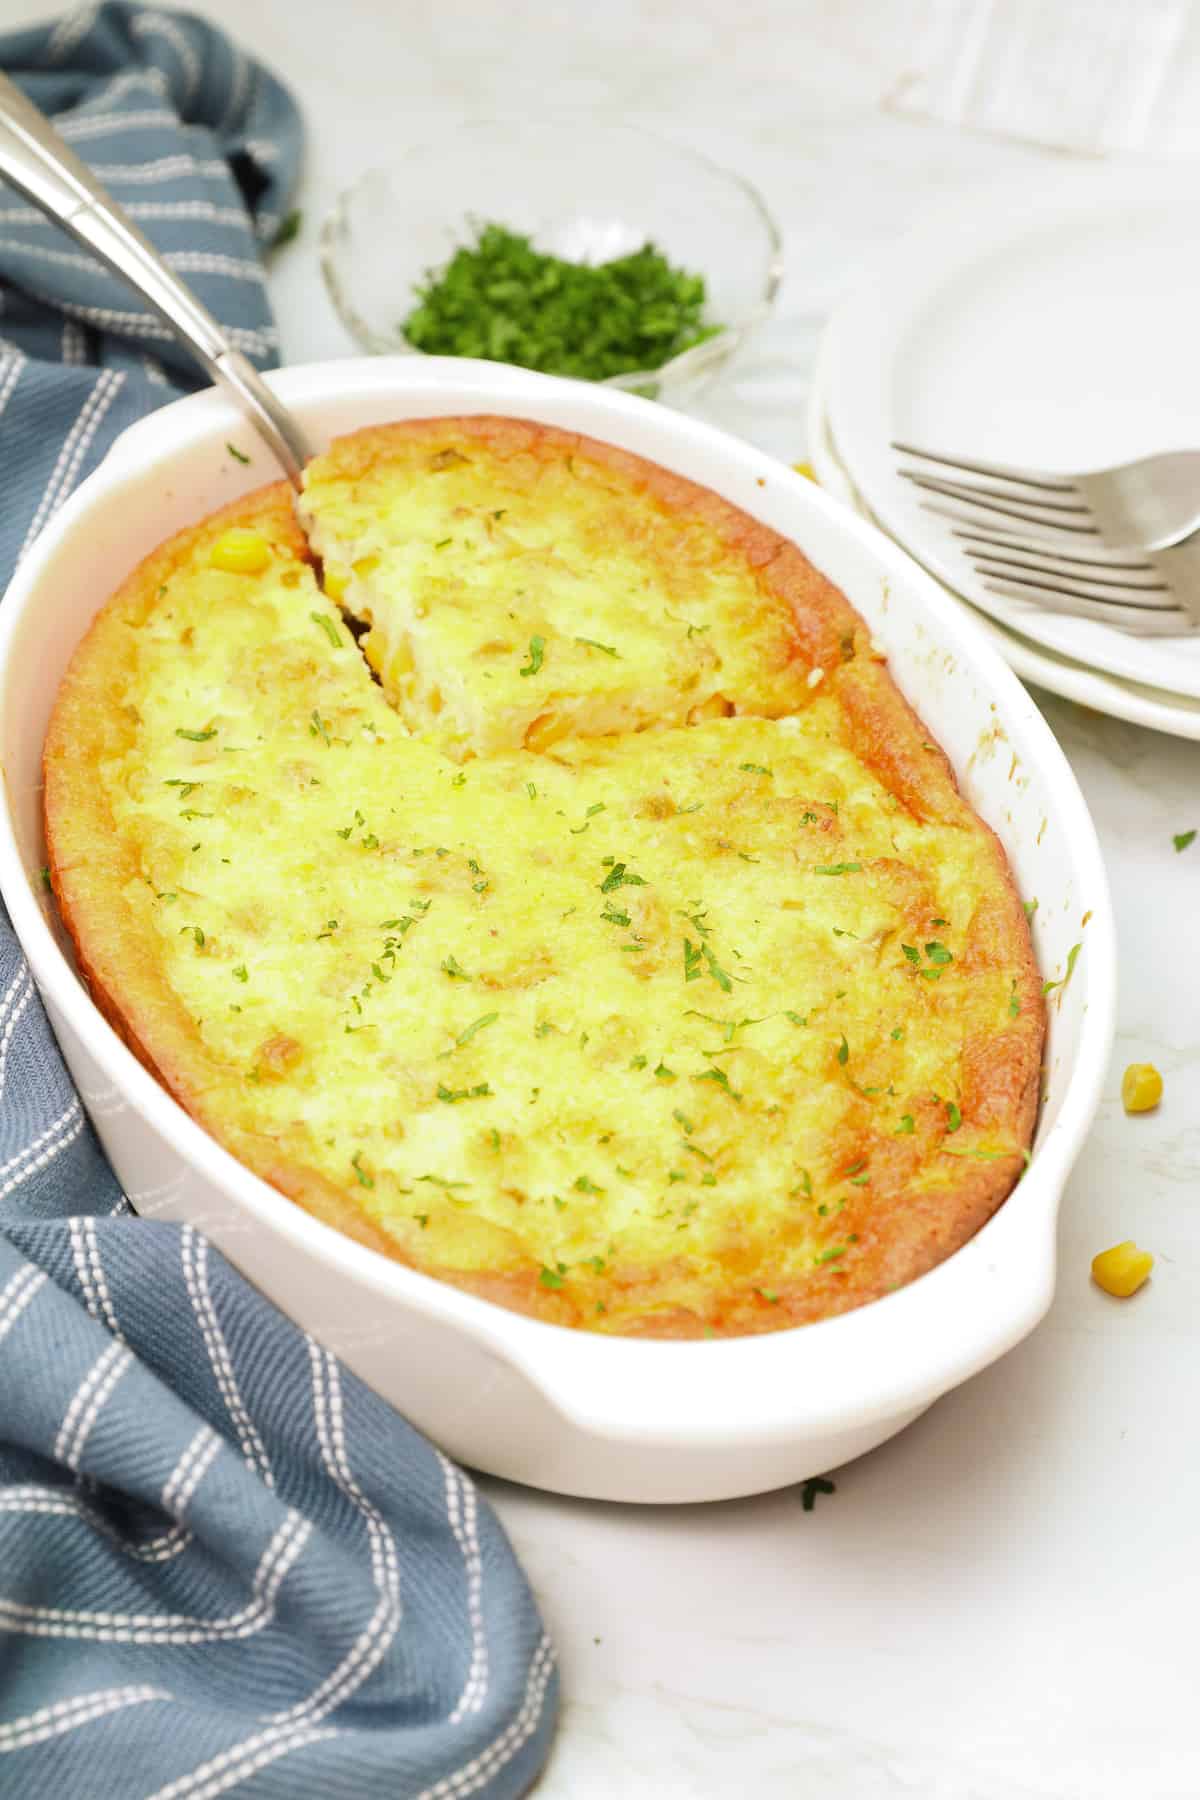 Buttery and creamy corn pudding to enjoy